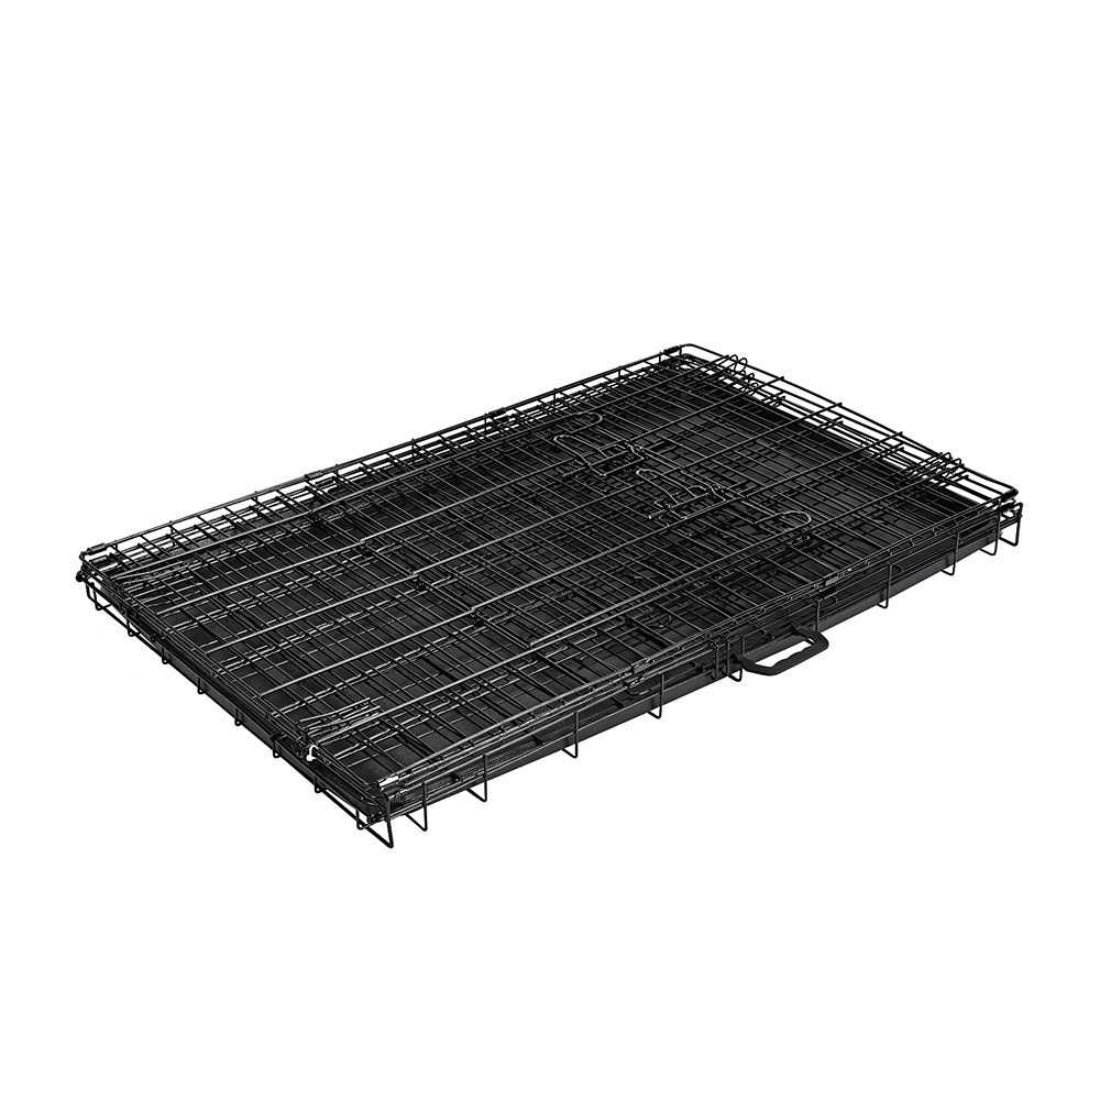 New Pet Dog Folding Kennel Cage Crate Carrier 36” Small Medium Large